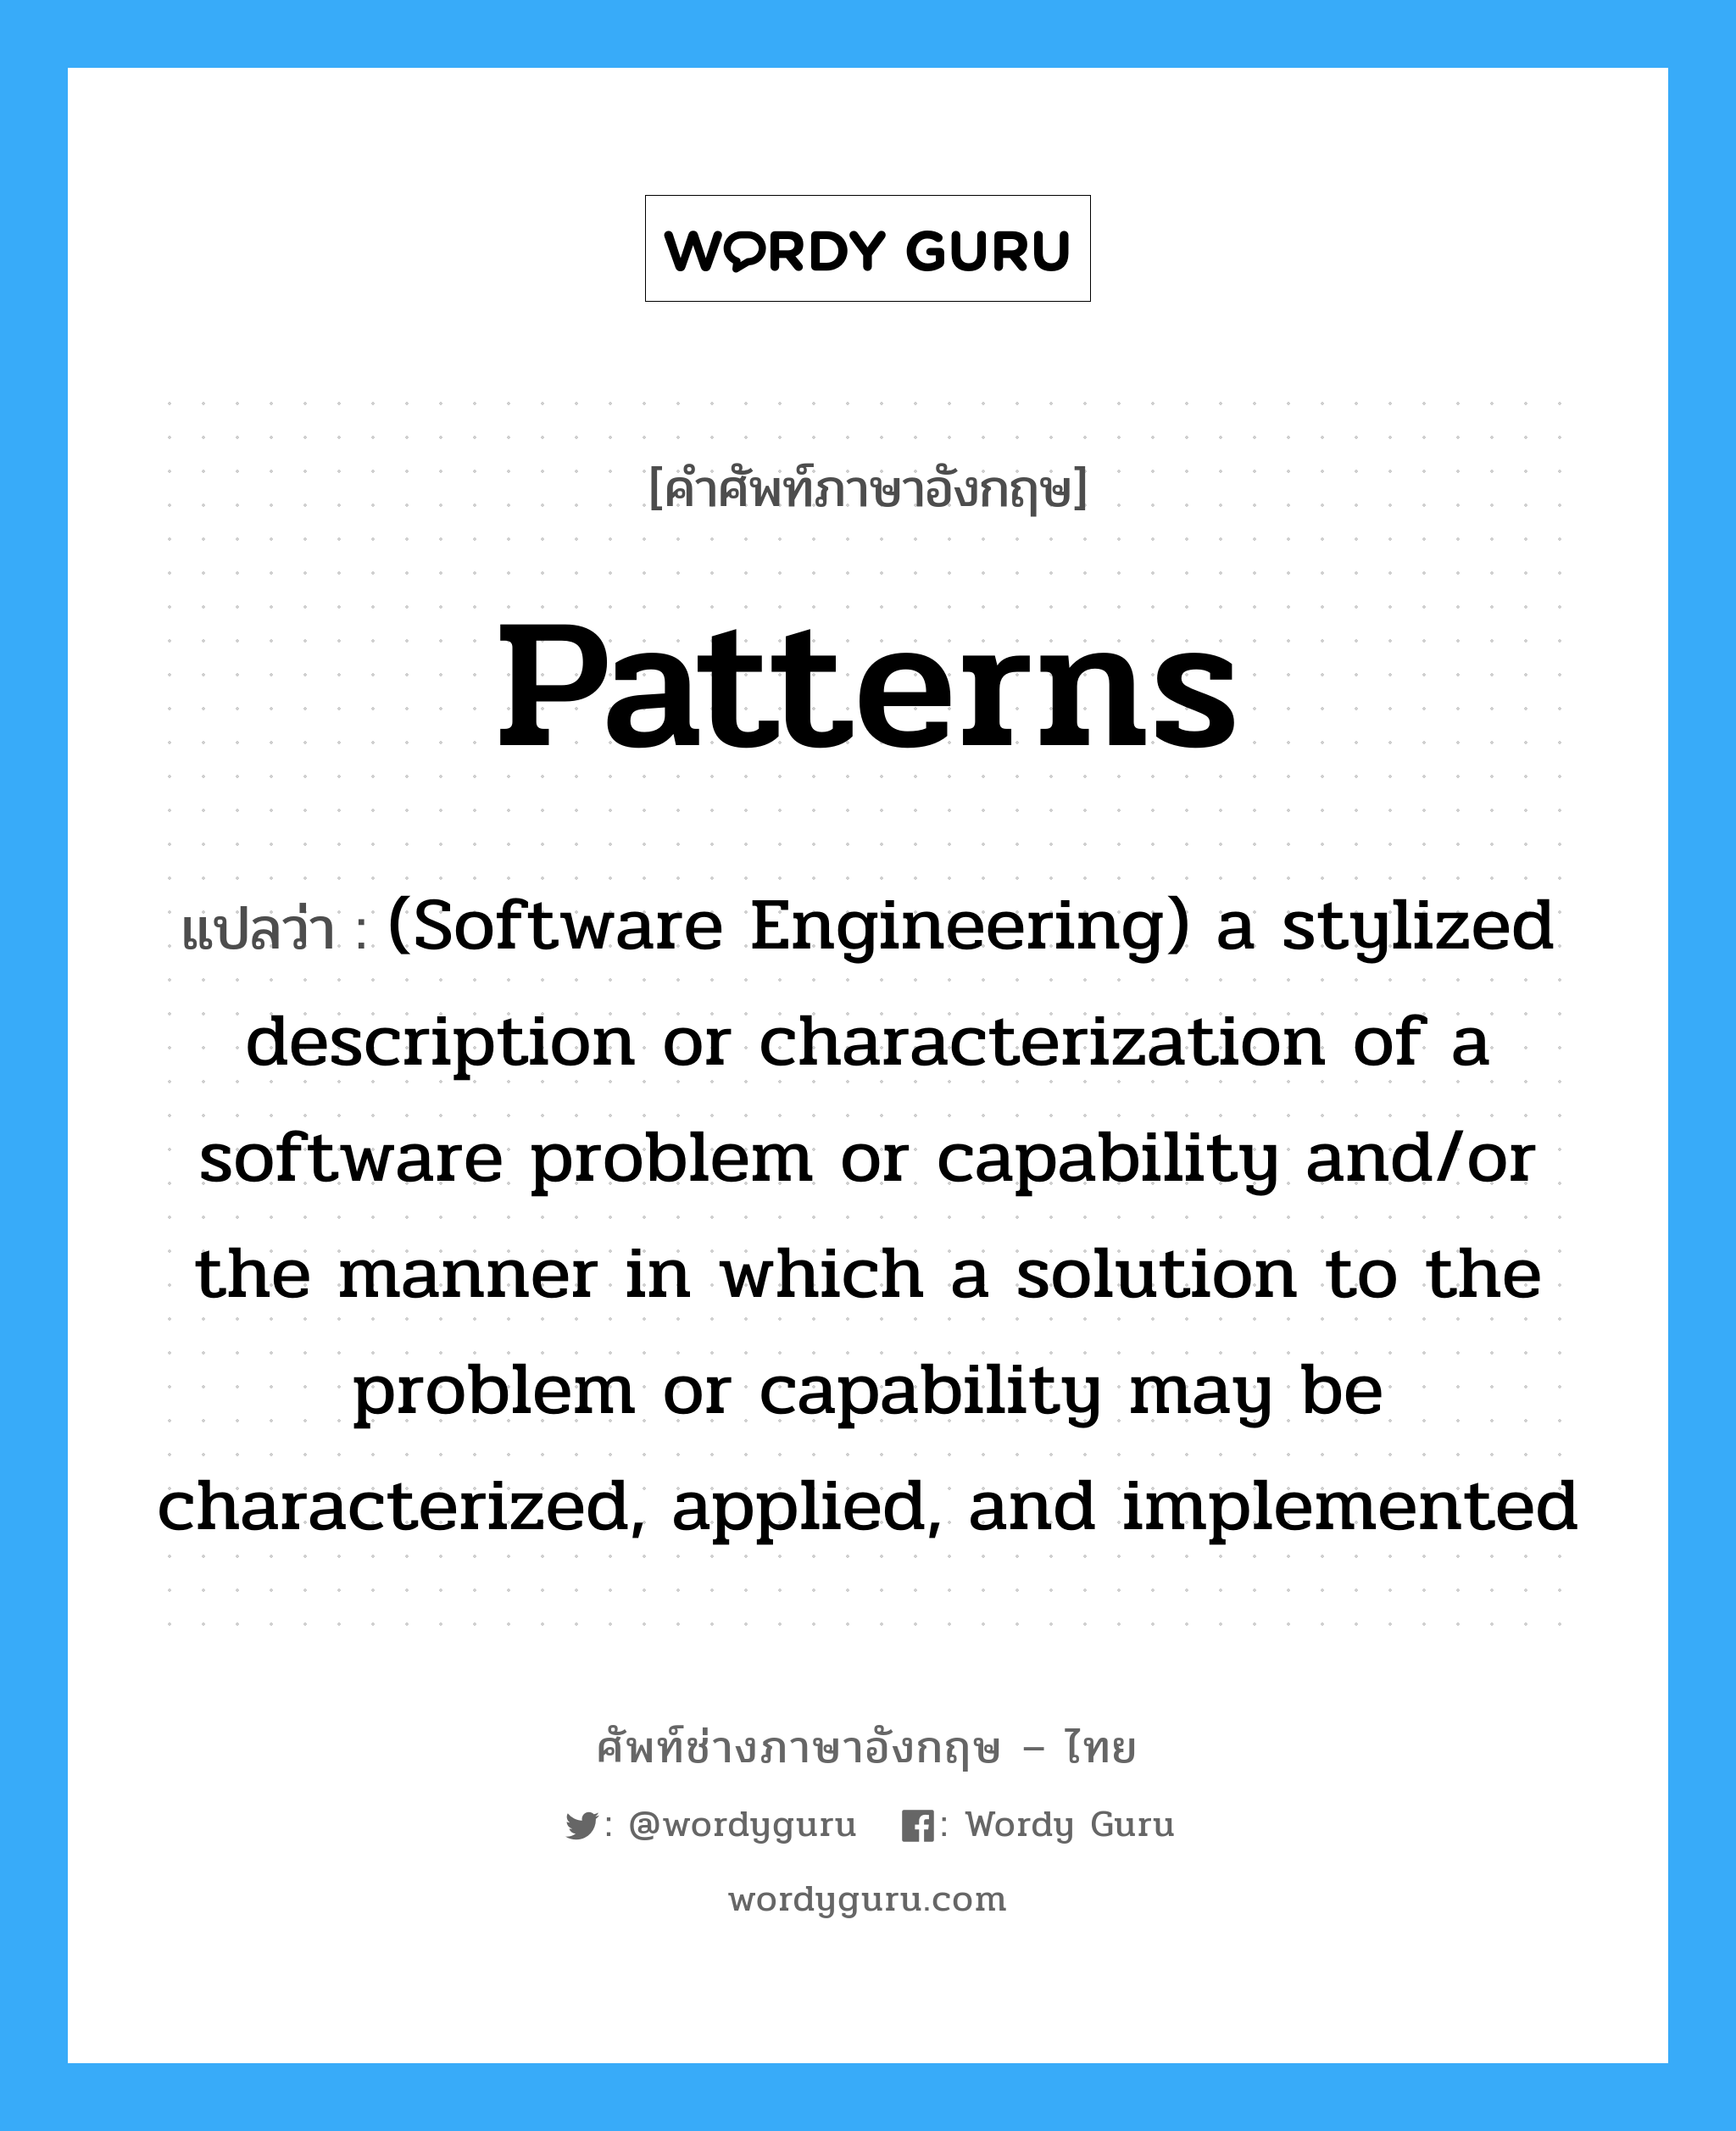 Patterns แปลว่า?, คำศัพท์ช่างภาษาอังกฤษ - ไทย Patterns คำศัพท์ภาษาอังกฤษ Patterns แปลว่า (Software Engineering) a stylized description or characterization of a software problem or capability and/or the manner in which a solution to the problem or capability may be characterized, applied, and implemented